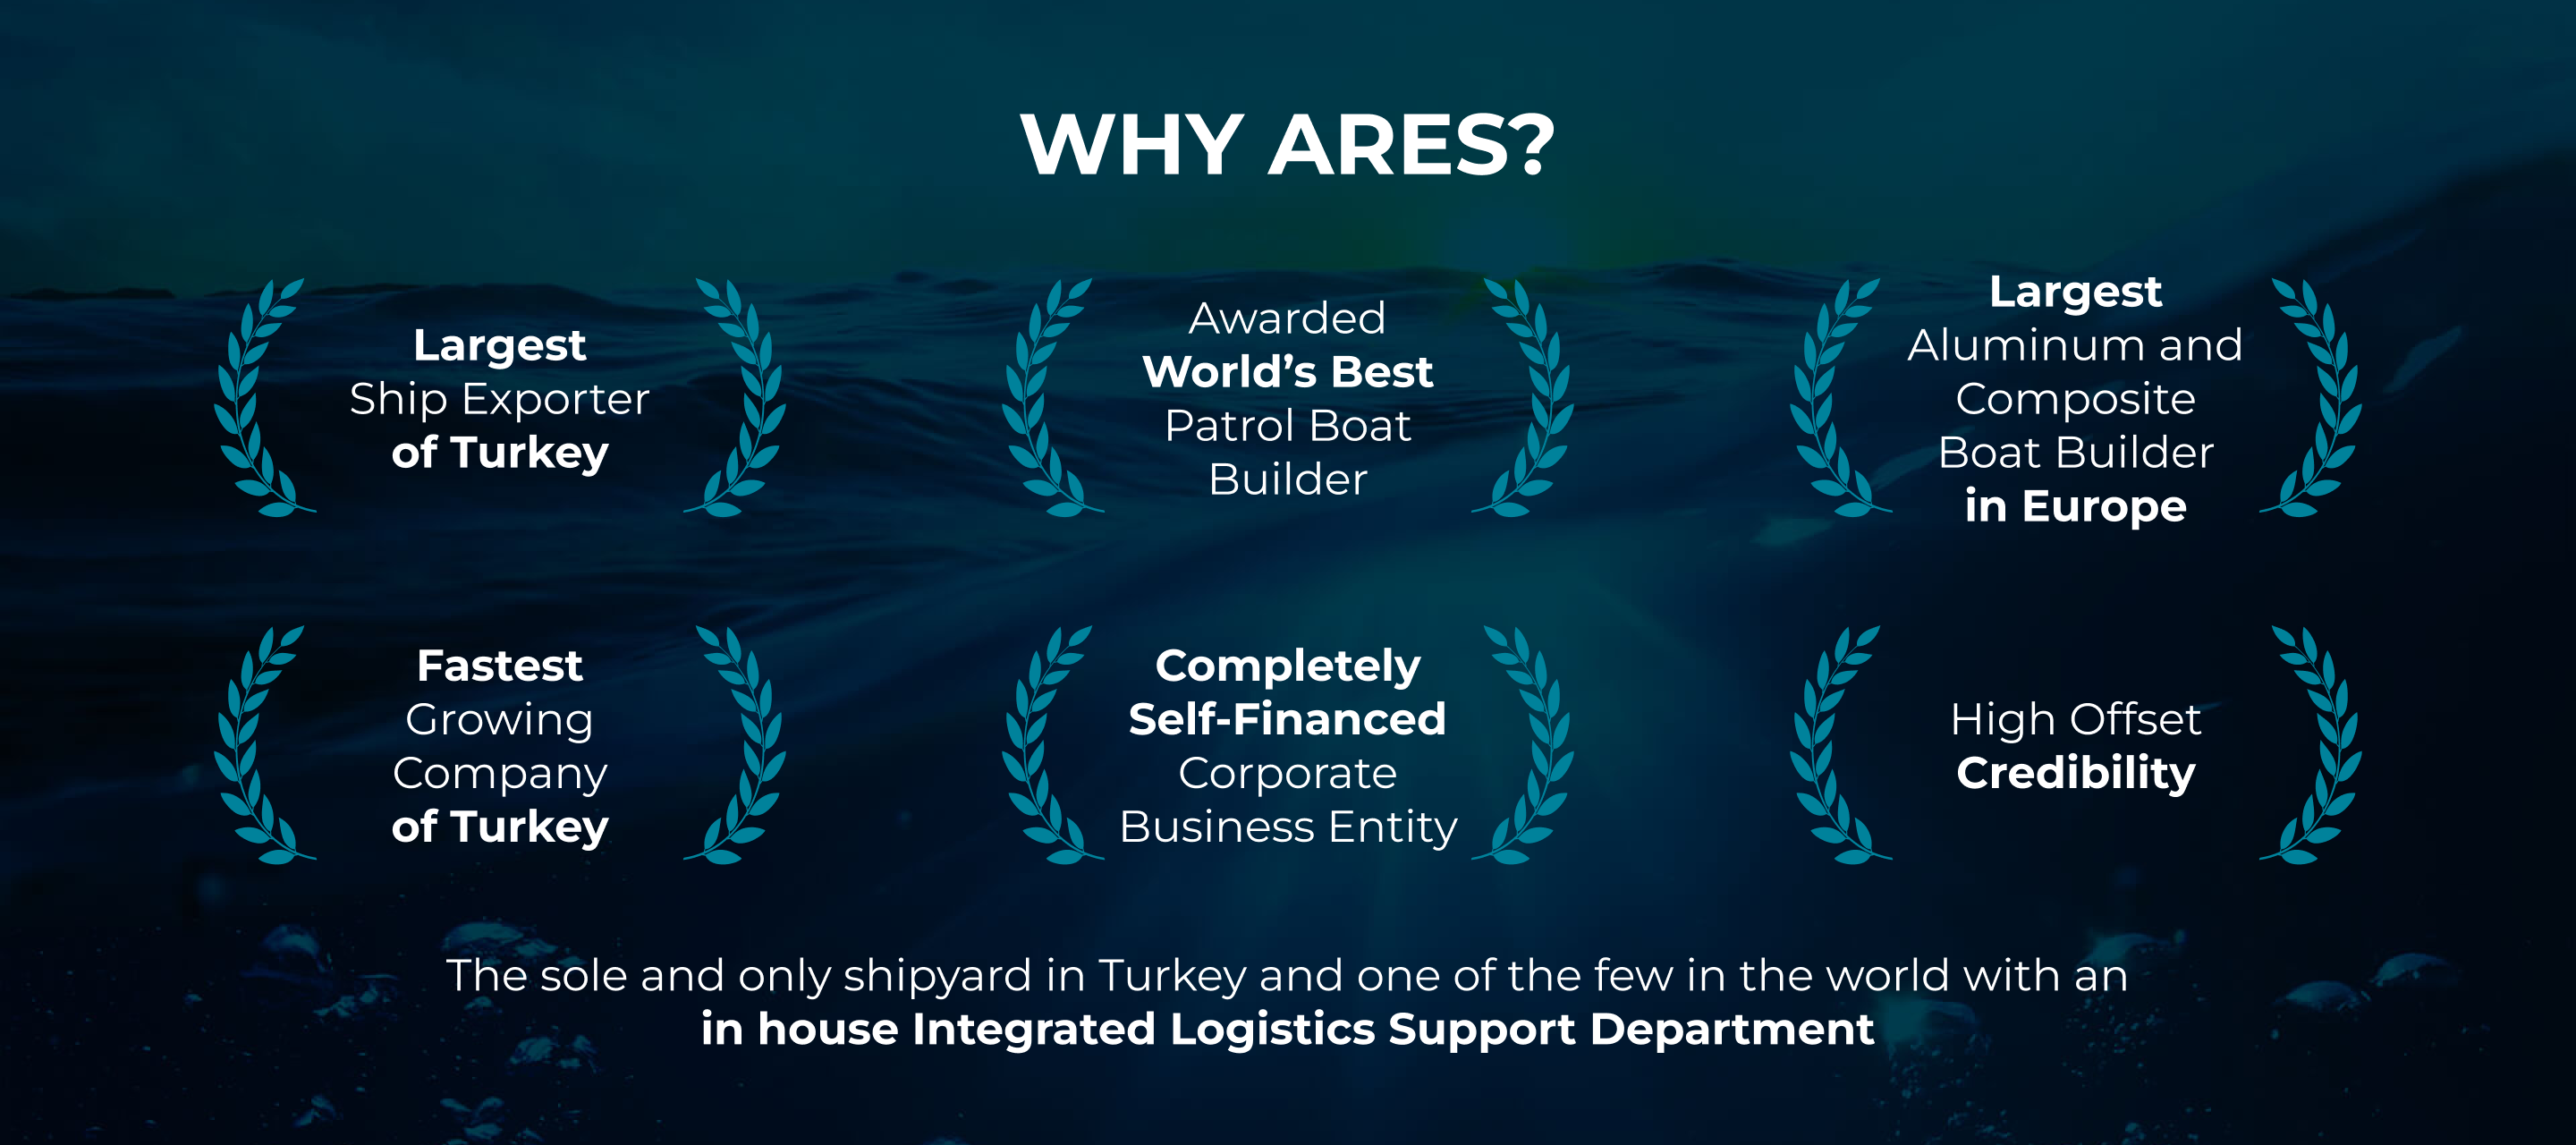 About Ares